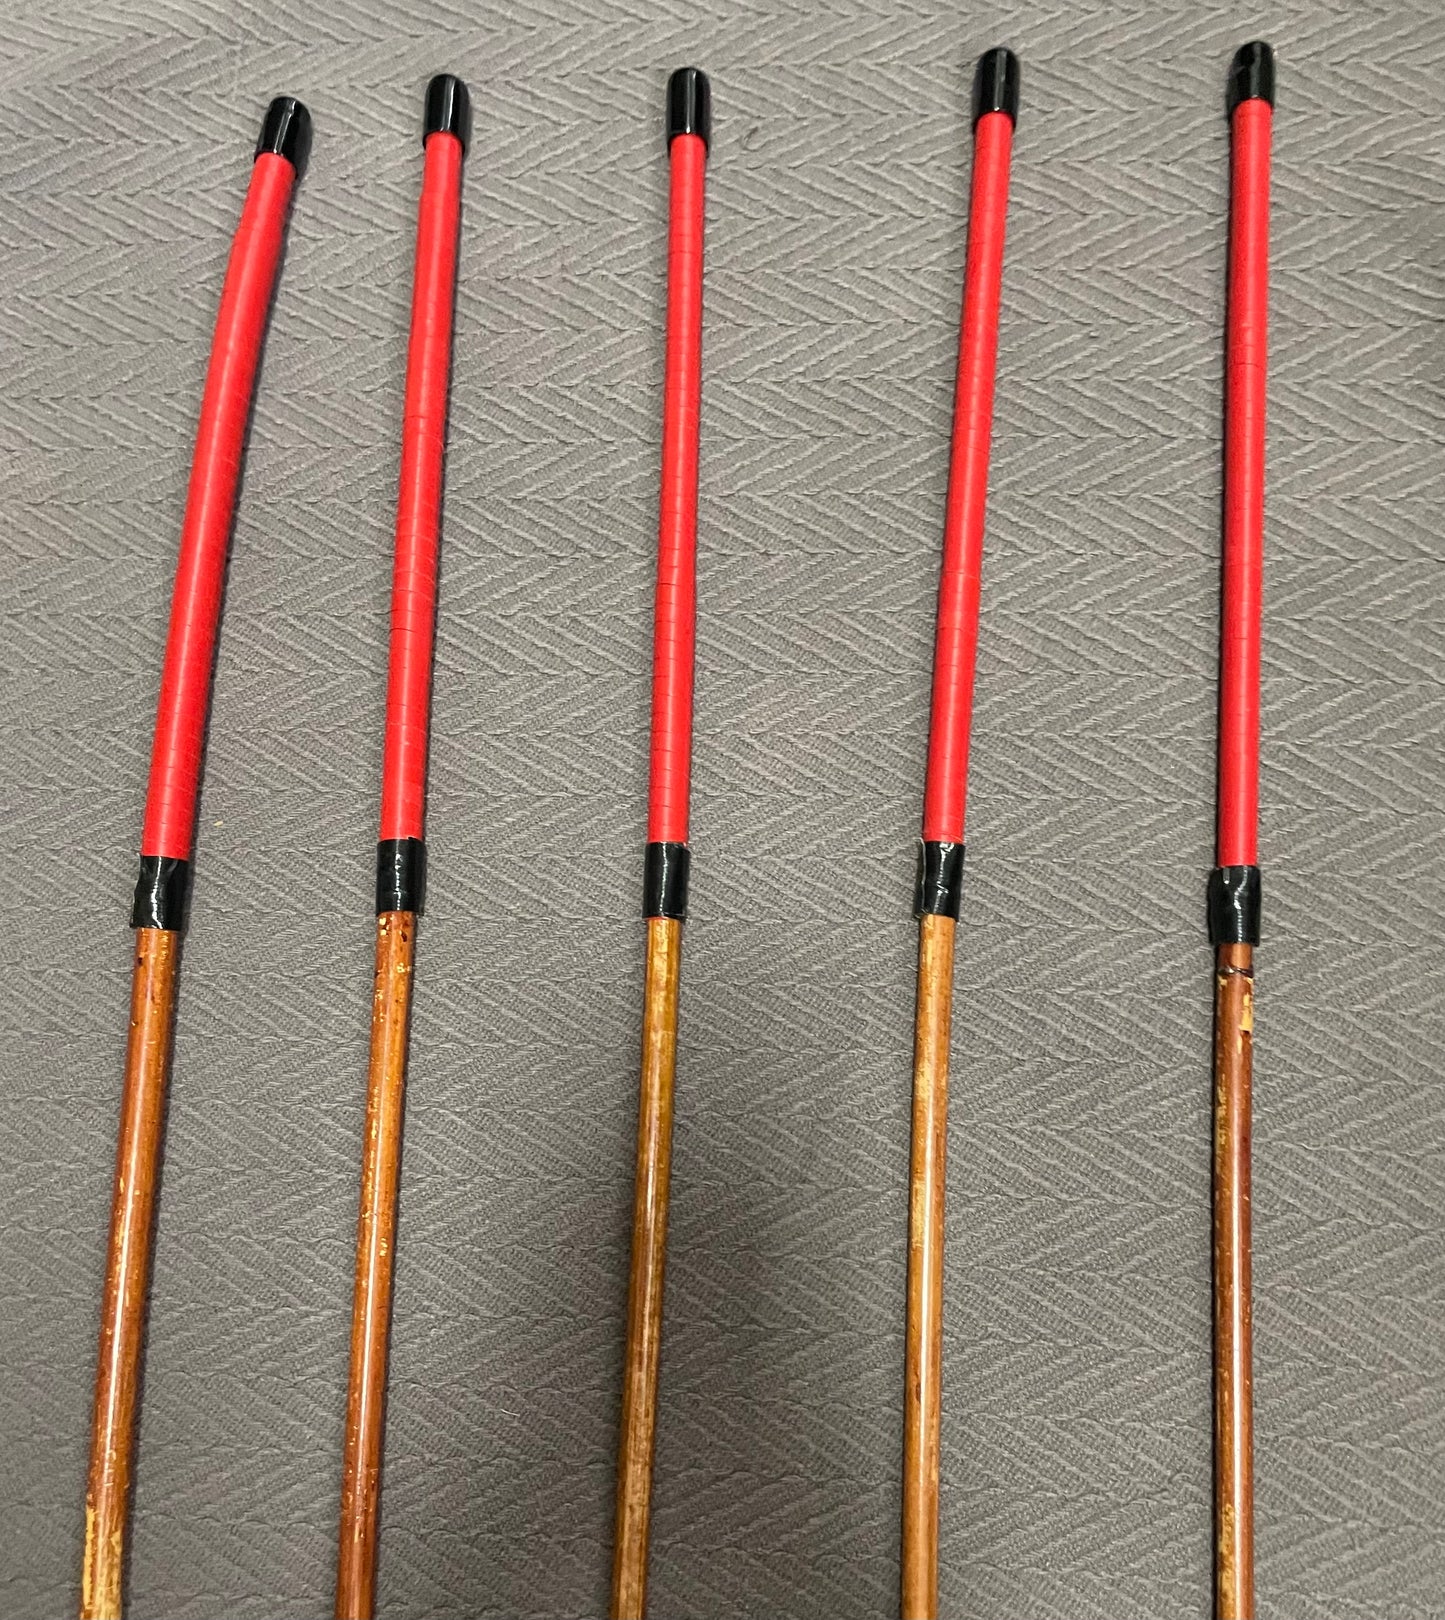 Sales Special Set of 5 Smoked Dragon Rattan Canes / Whipping Canes - 100 cms Length - RED or BLACK Kangaroo Leather Handles-  - Englishvice Canes